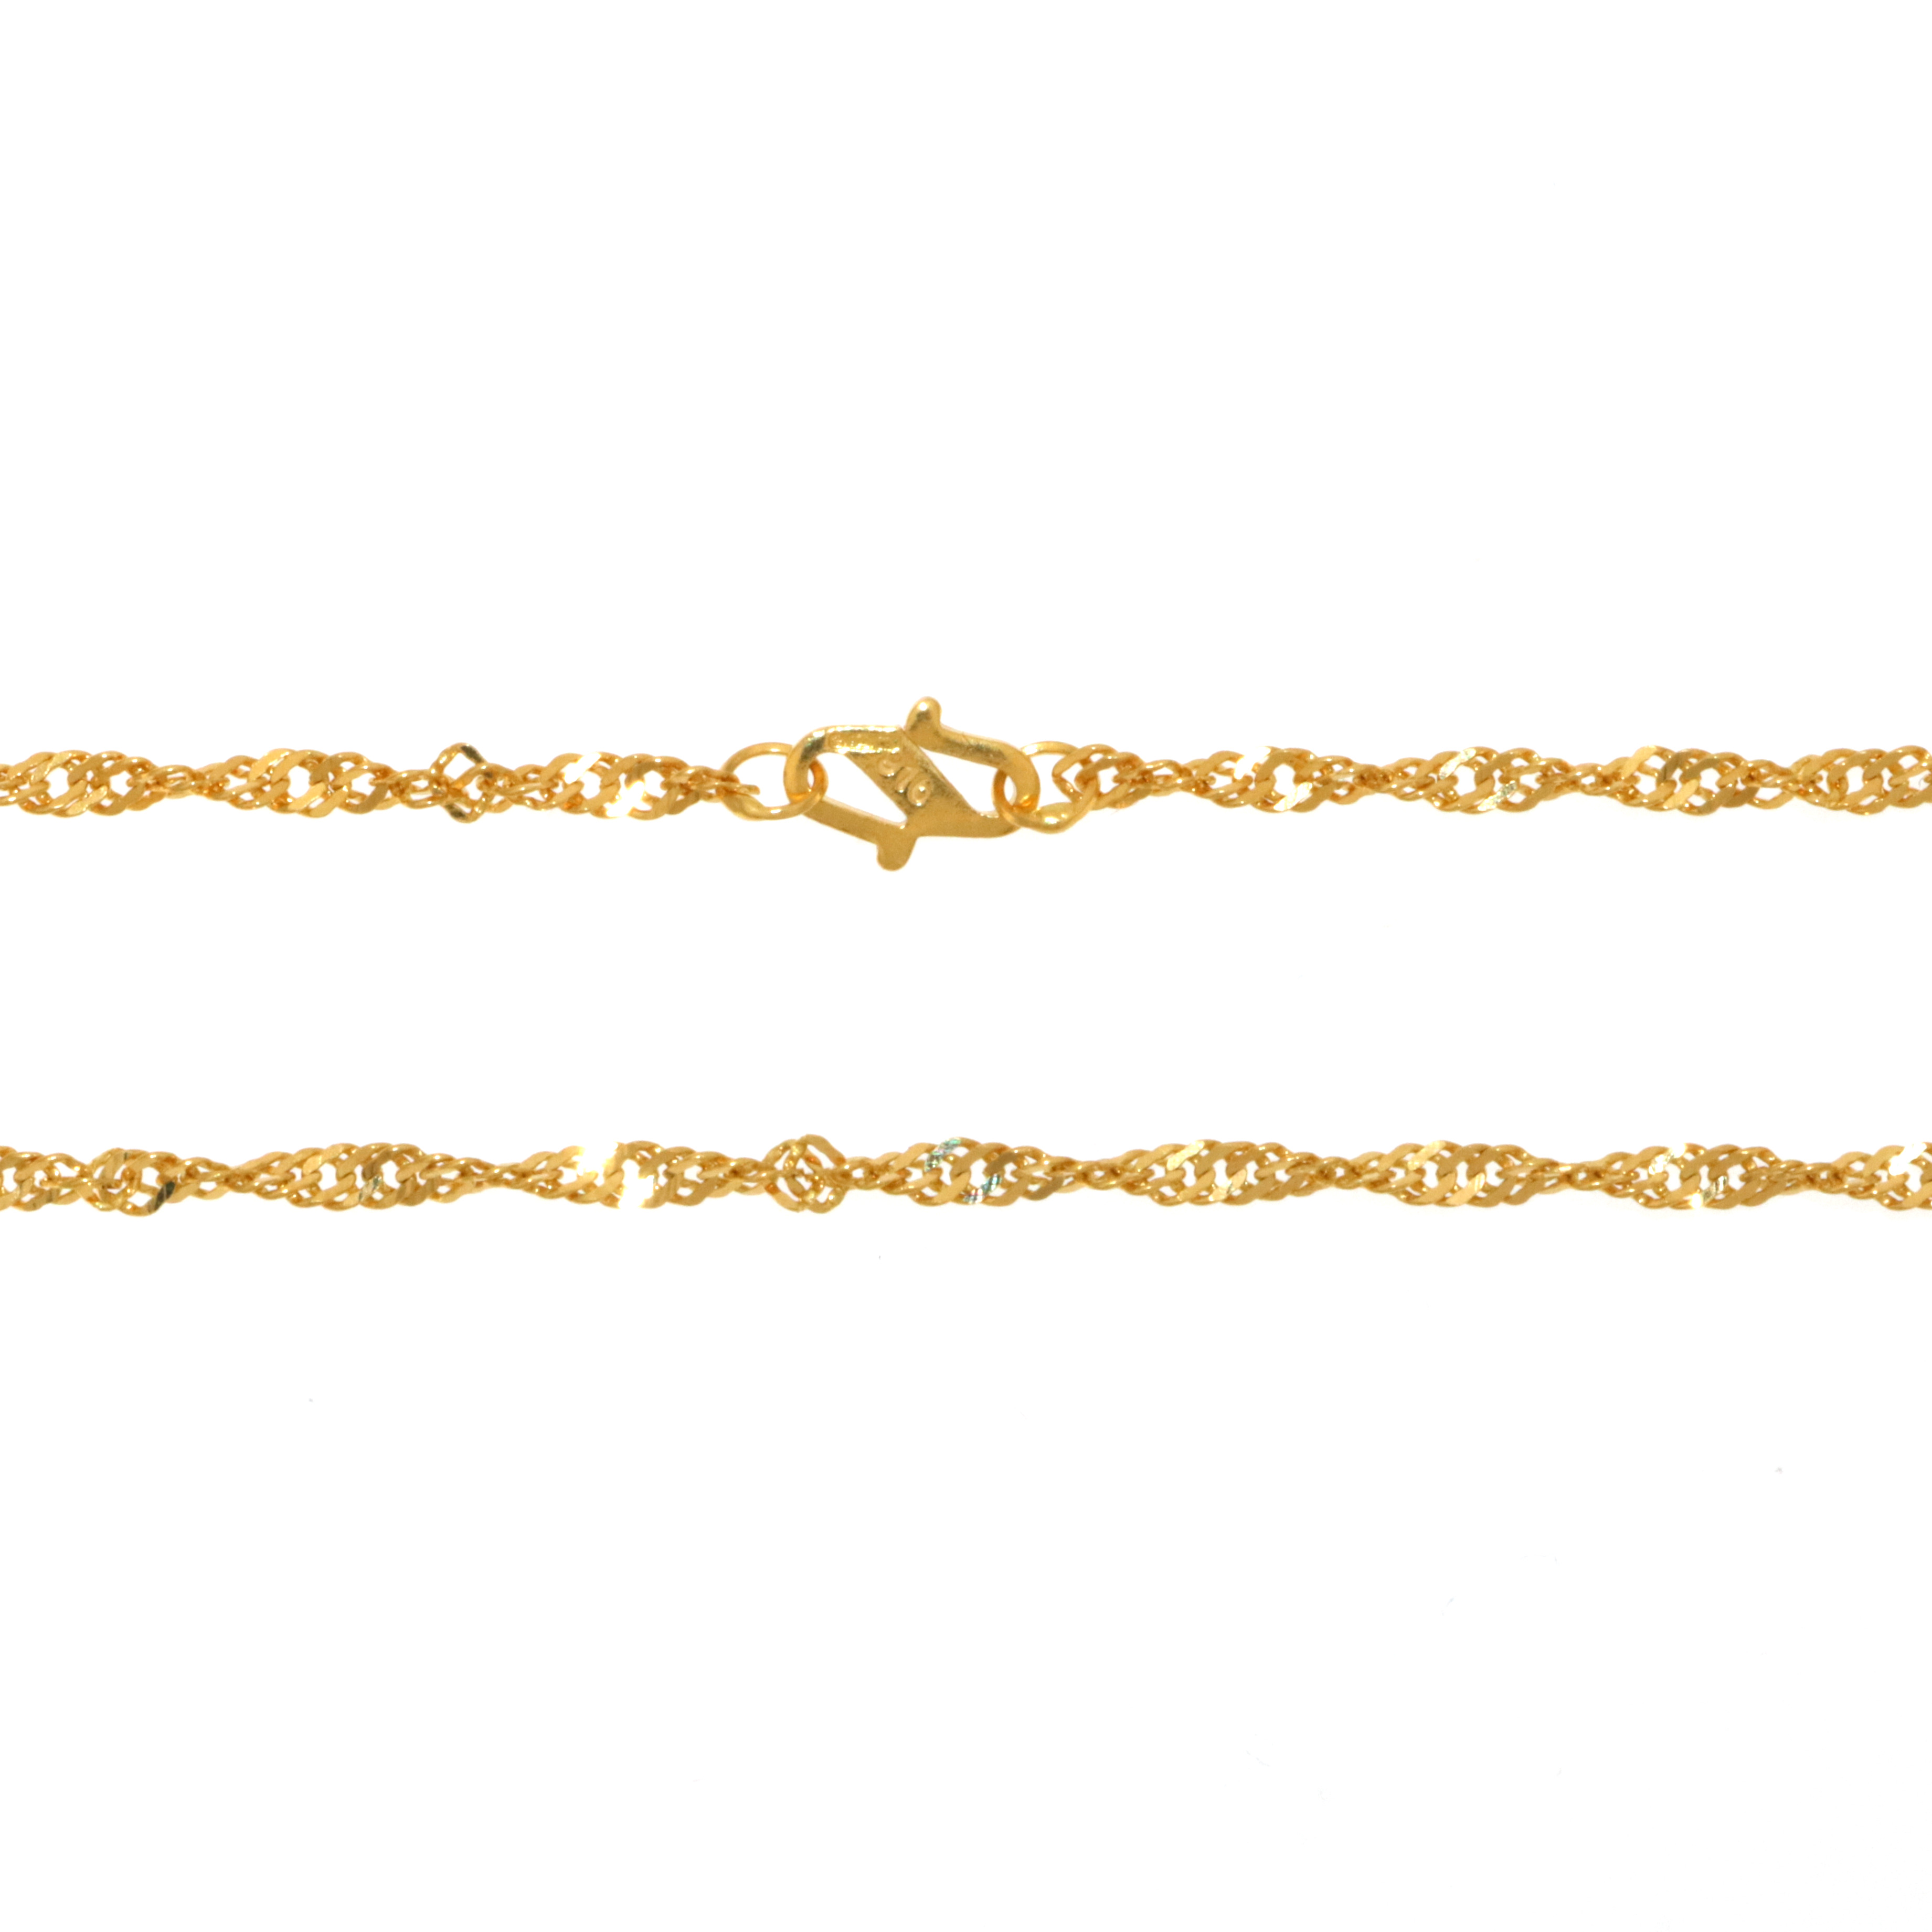 22ct Real Gold Asian/Indian/Pakistani Style Ripple Chain